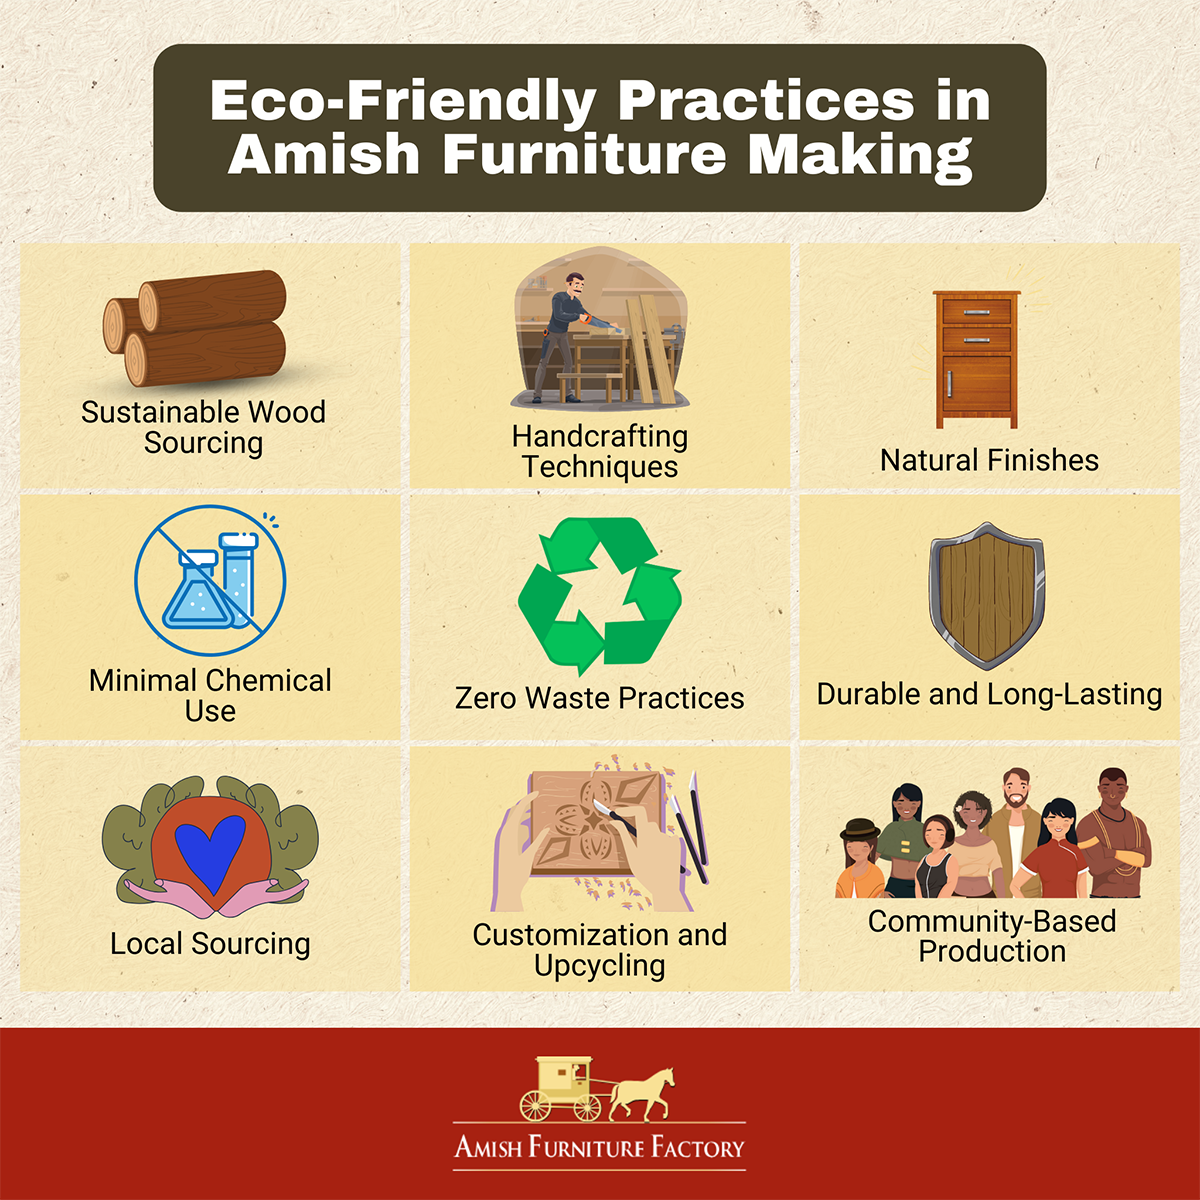 The eco-friendly practices in Amish furniture making.